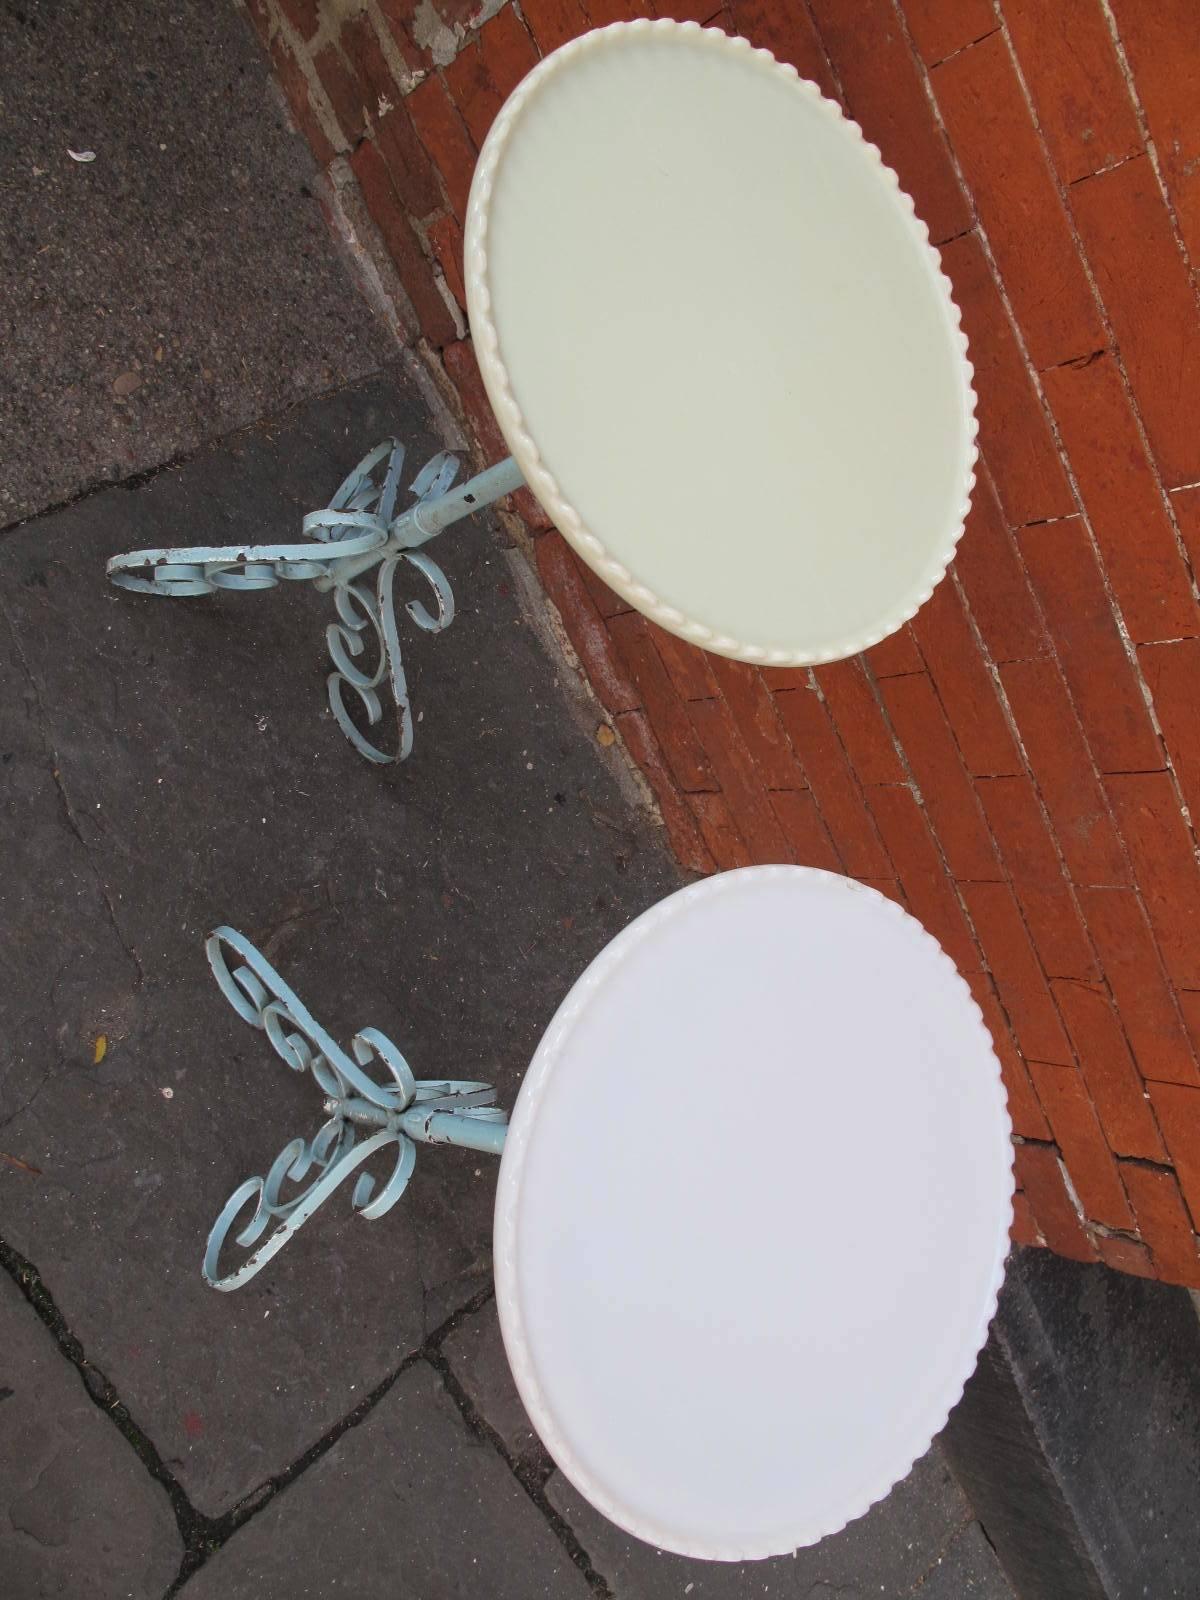 Pair of iron stands in robin's egg blue paint. Each having scalloped milk glass plates resting atop the frame. Please note: milk glass is slightly different shades of ivory as shown. Plates are not permanently adhered to bases. Available as a pair.